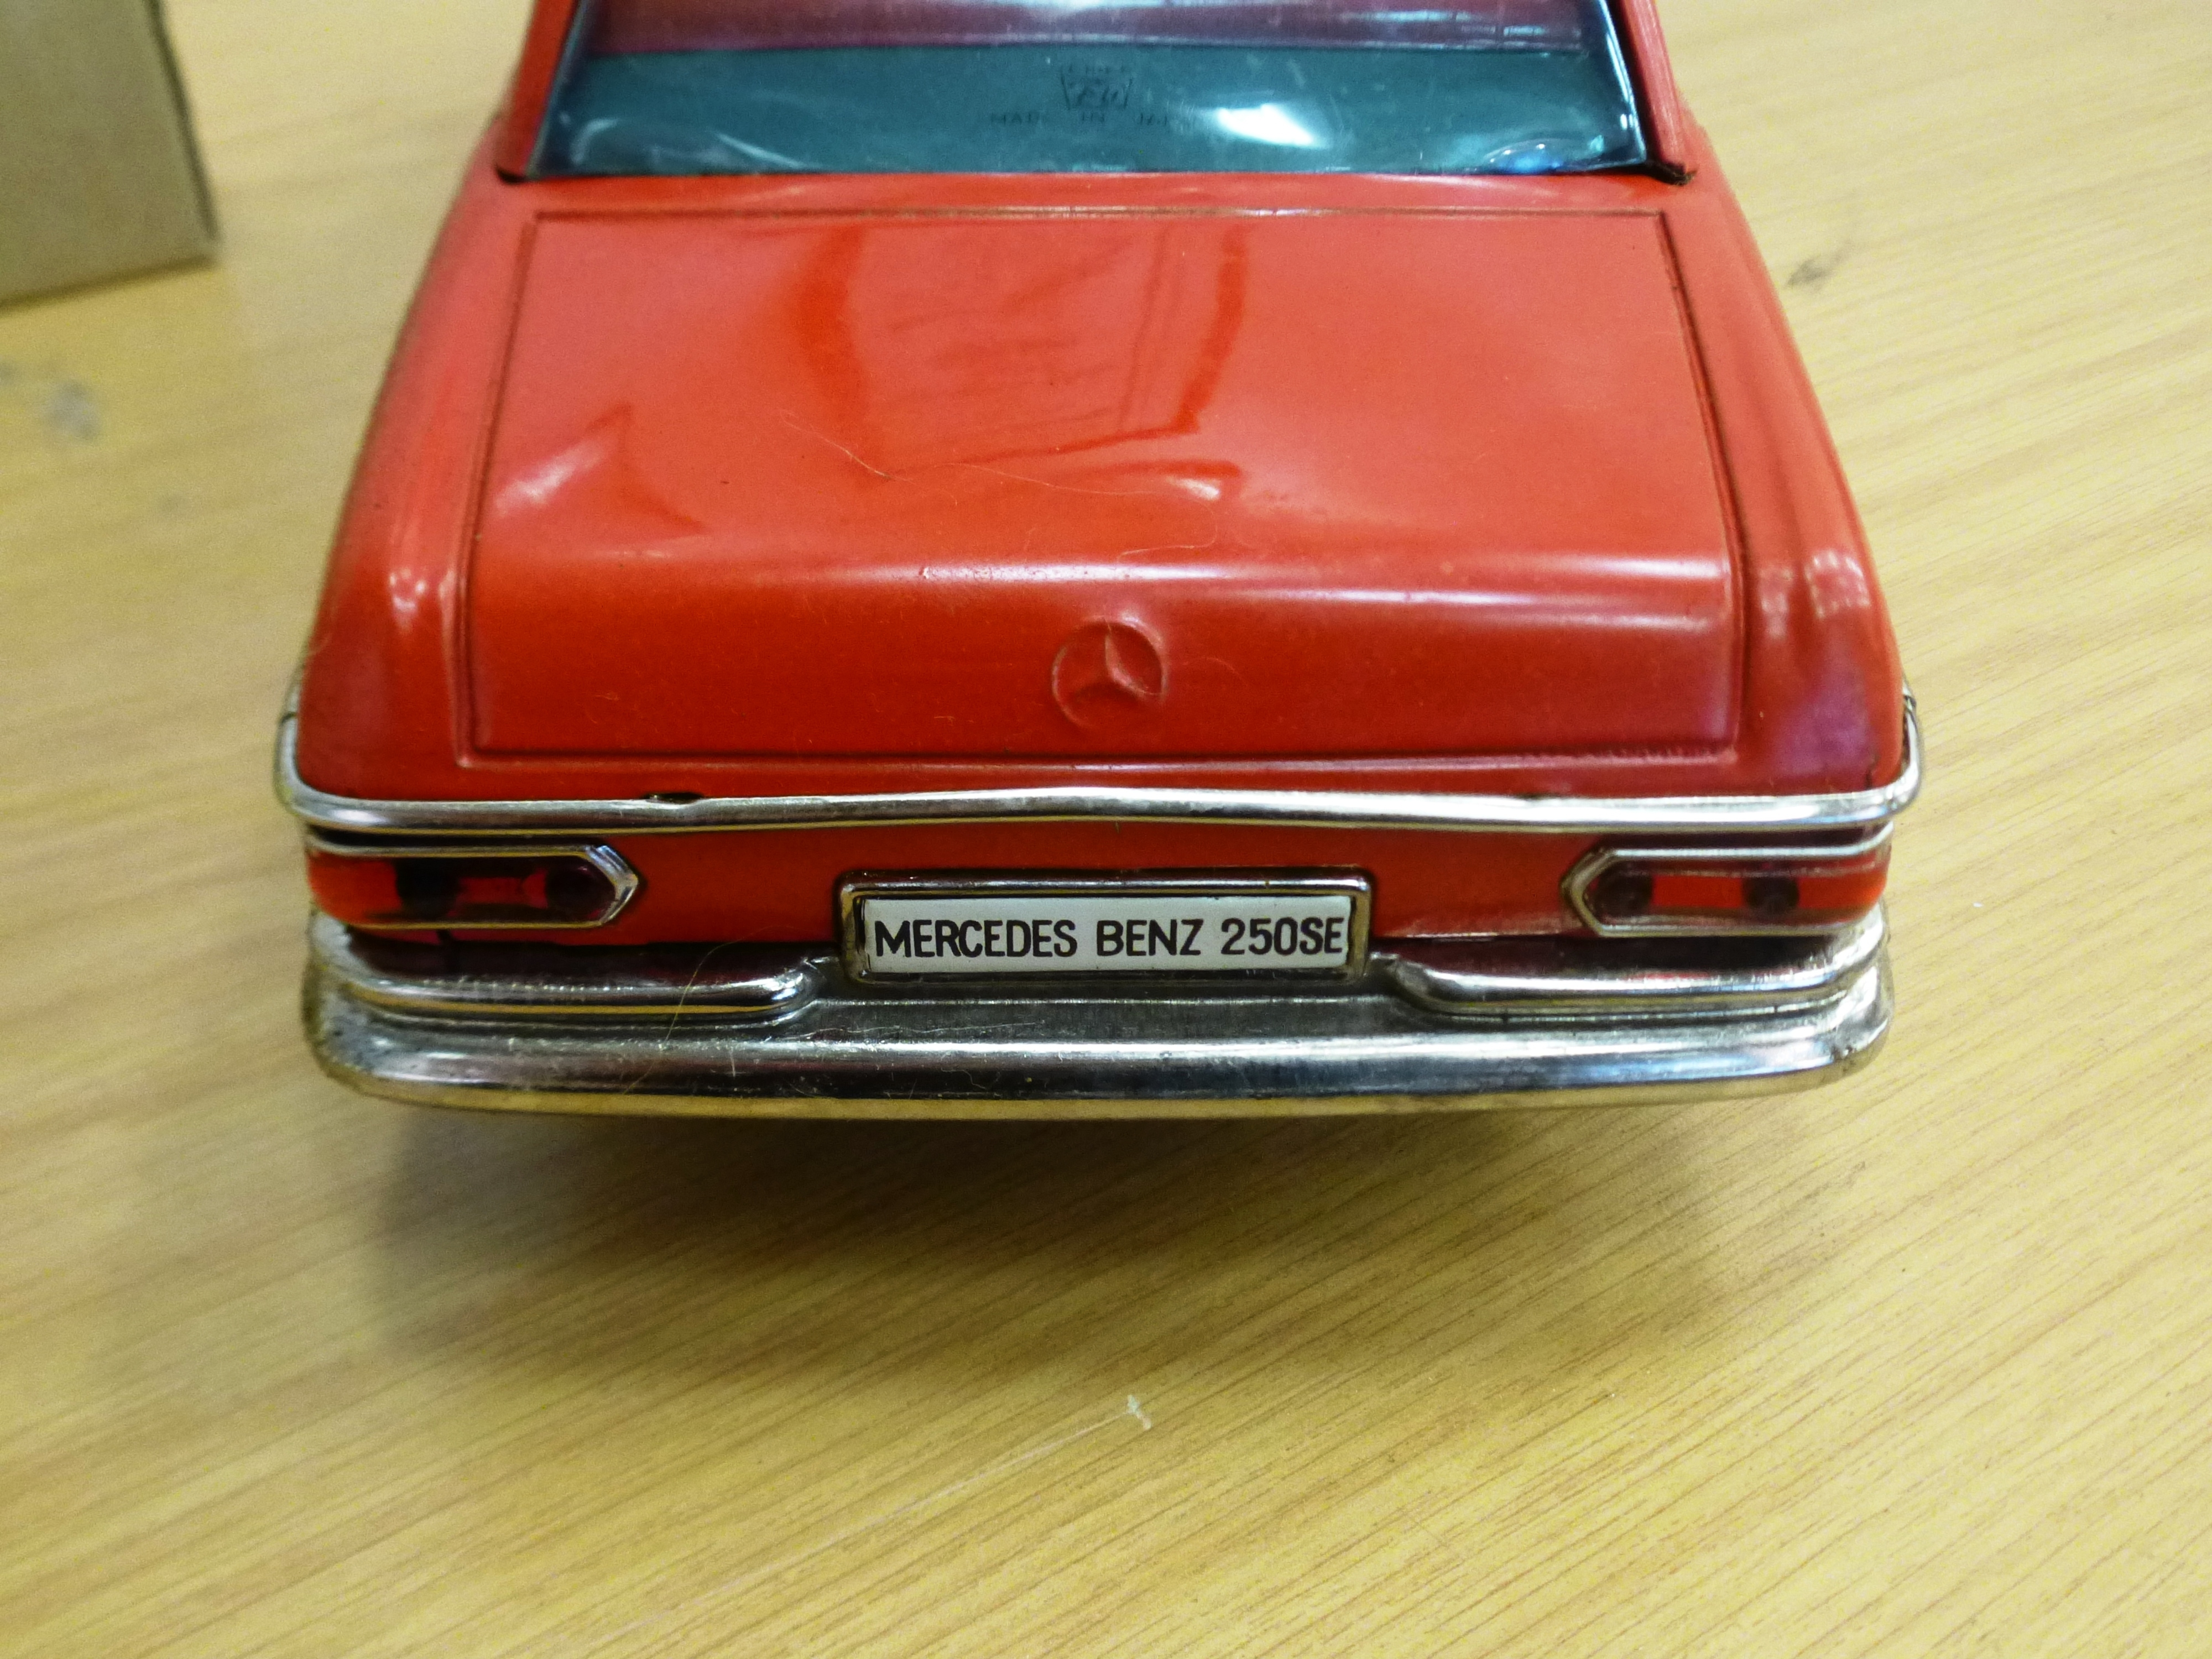 BOXED ICHIKO BATTERY POWERED MERCEDES-BENZ 250 SE (RED) - Image 7 of 7